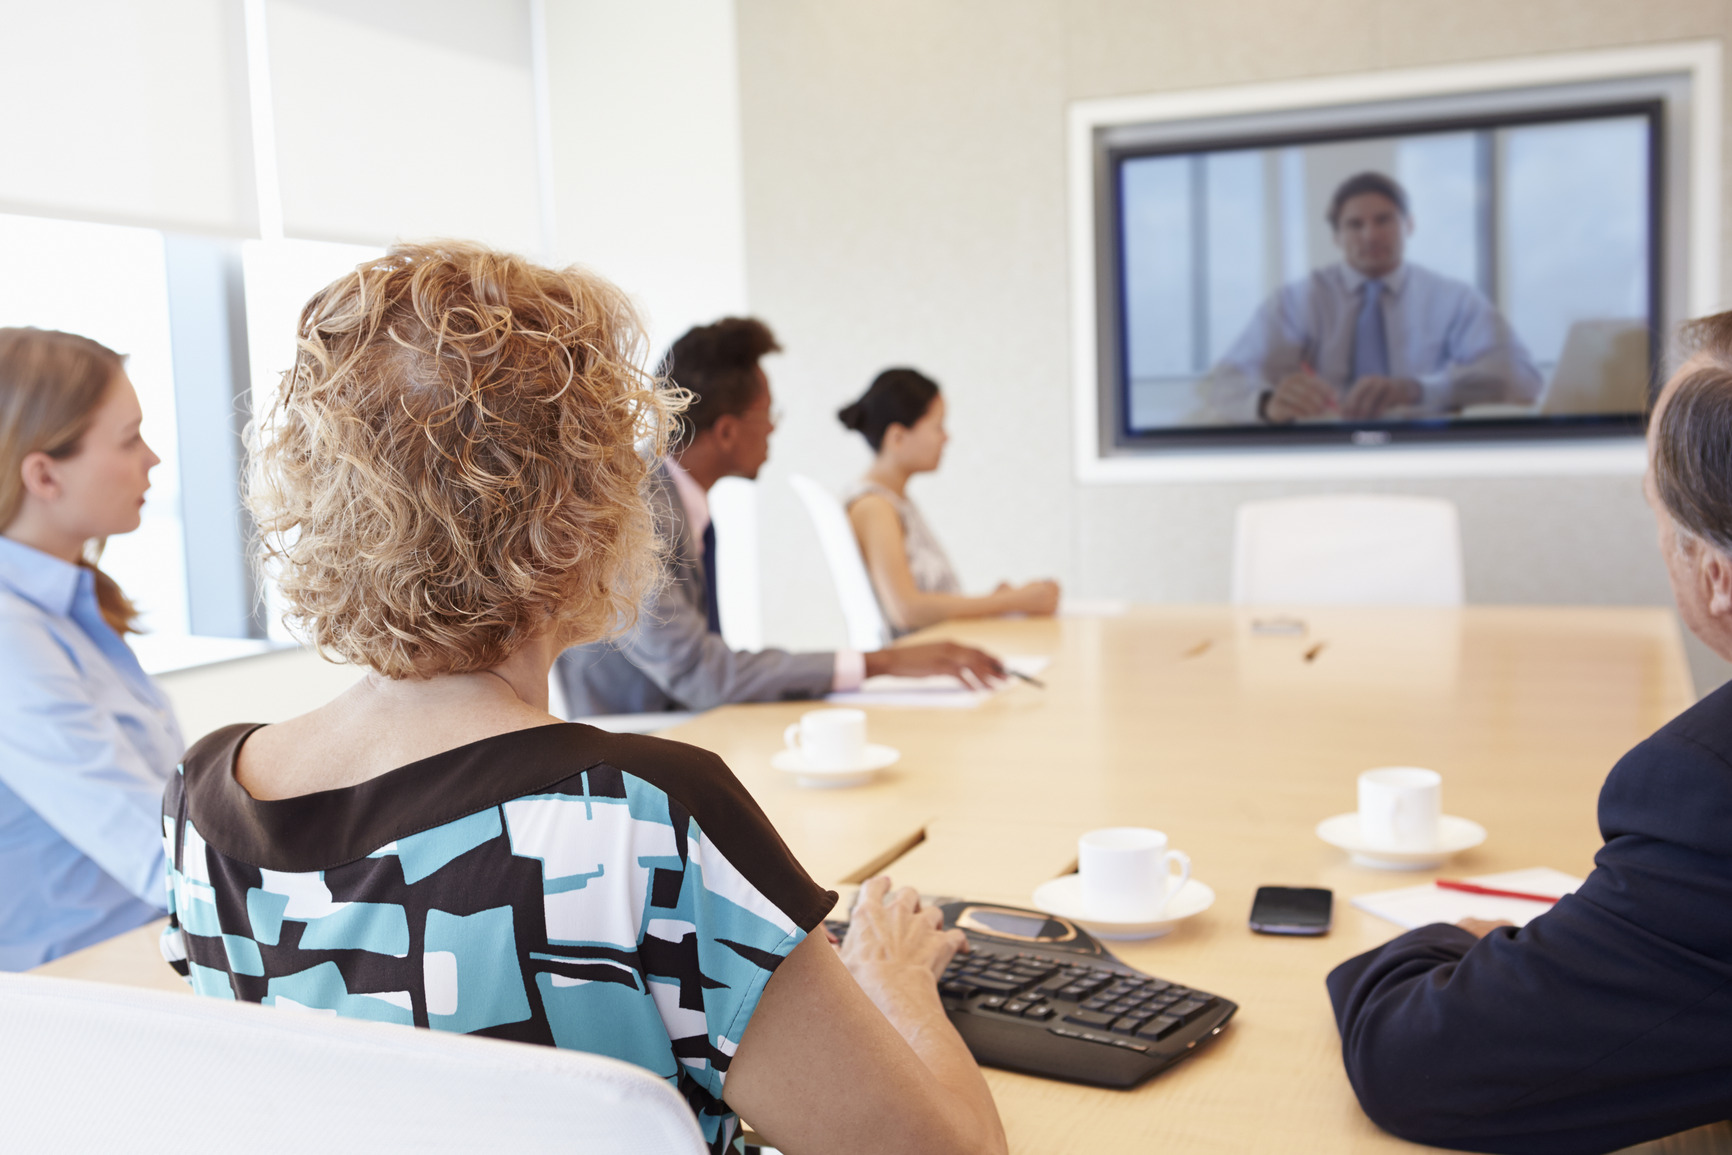 photodune-12460768-group-of-businesspeople-having-video-conference-in-boardroom-m